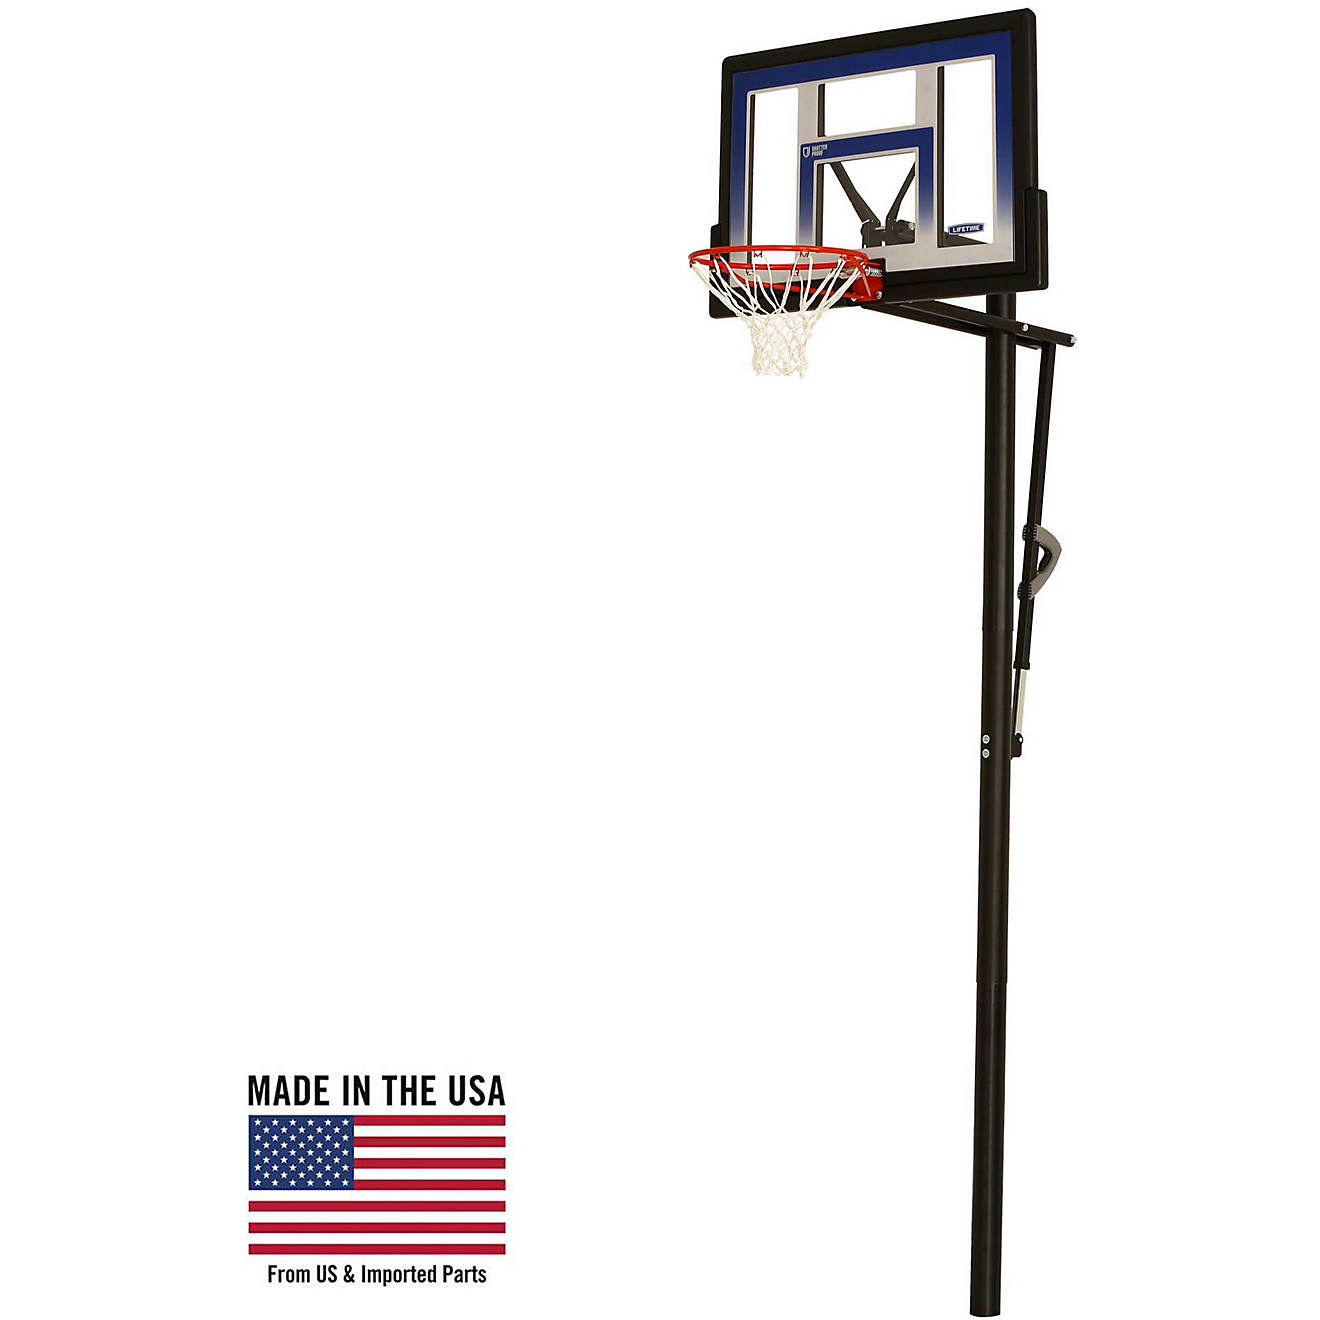 Fusion Basketball System Fade-Resistant w/ Shatterproof Backboard 7.5 to 10 ft 